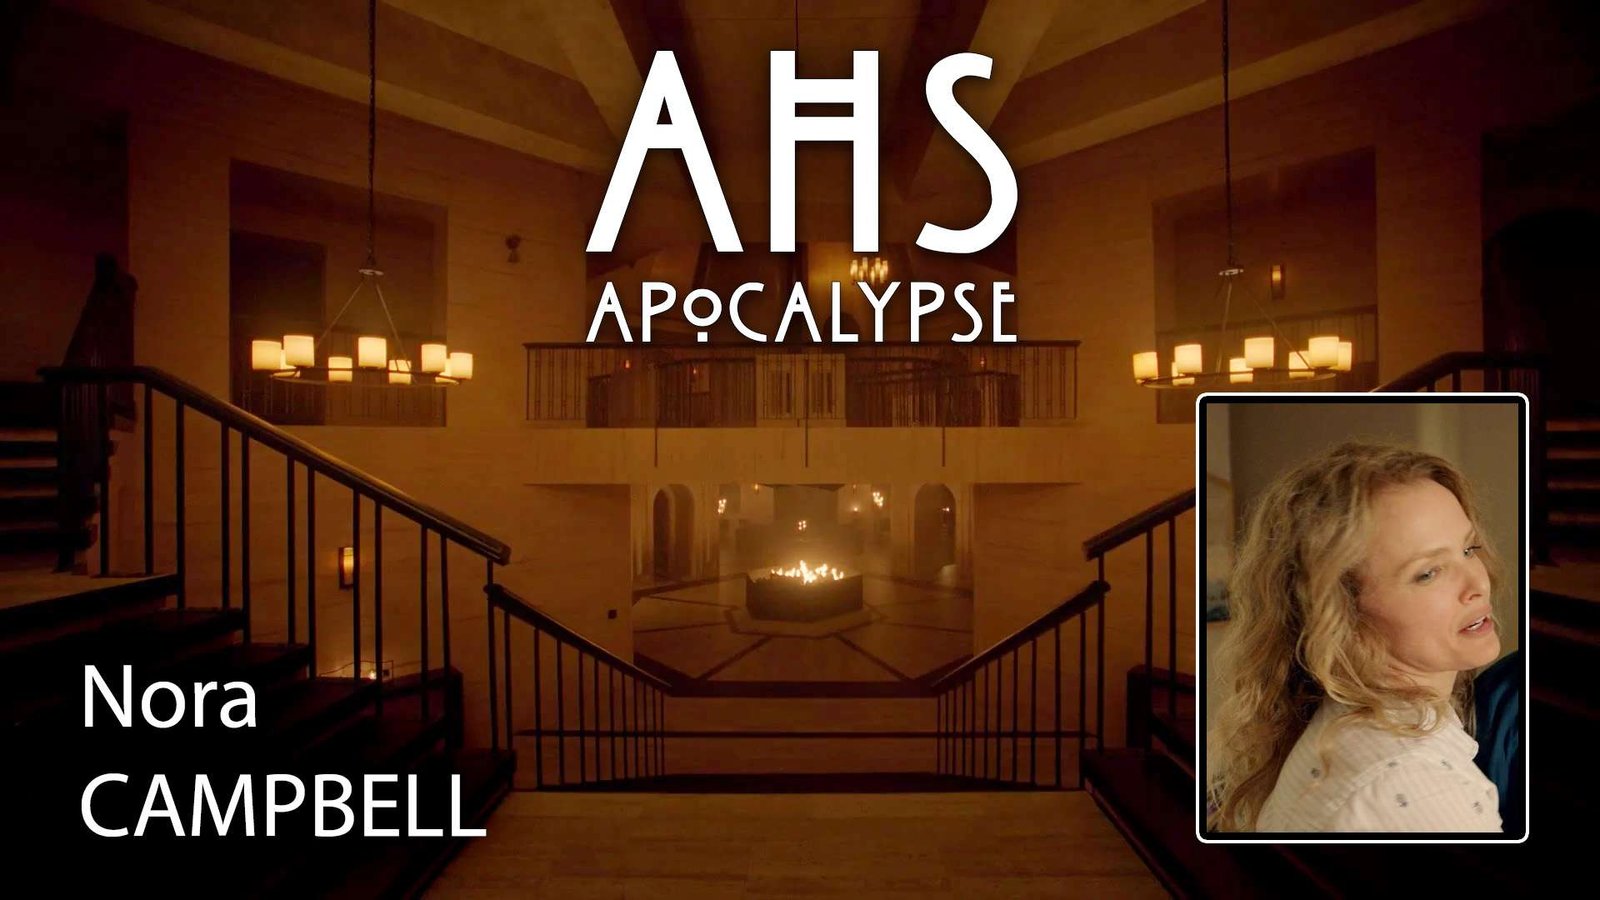 Fiche-personnage-AHS8-nora-campbell